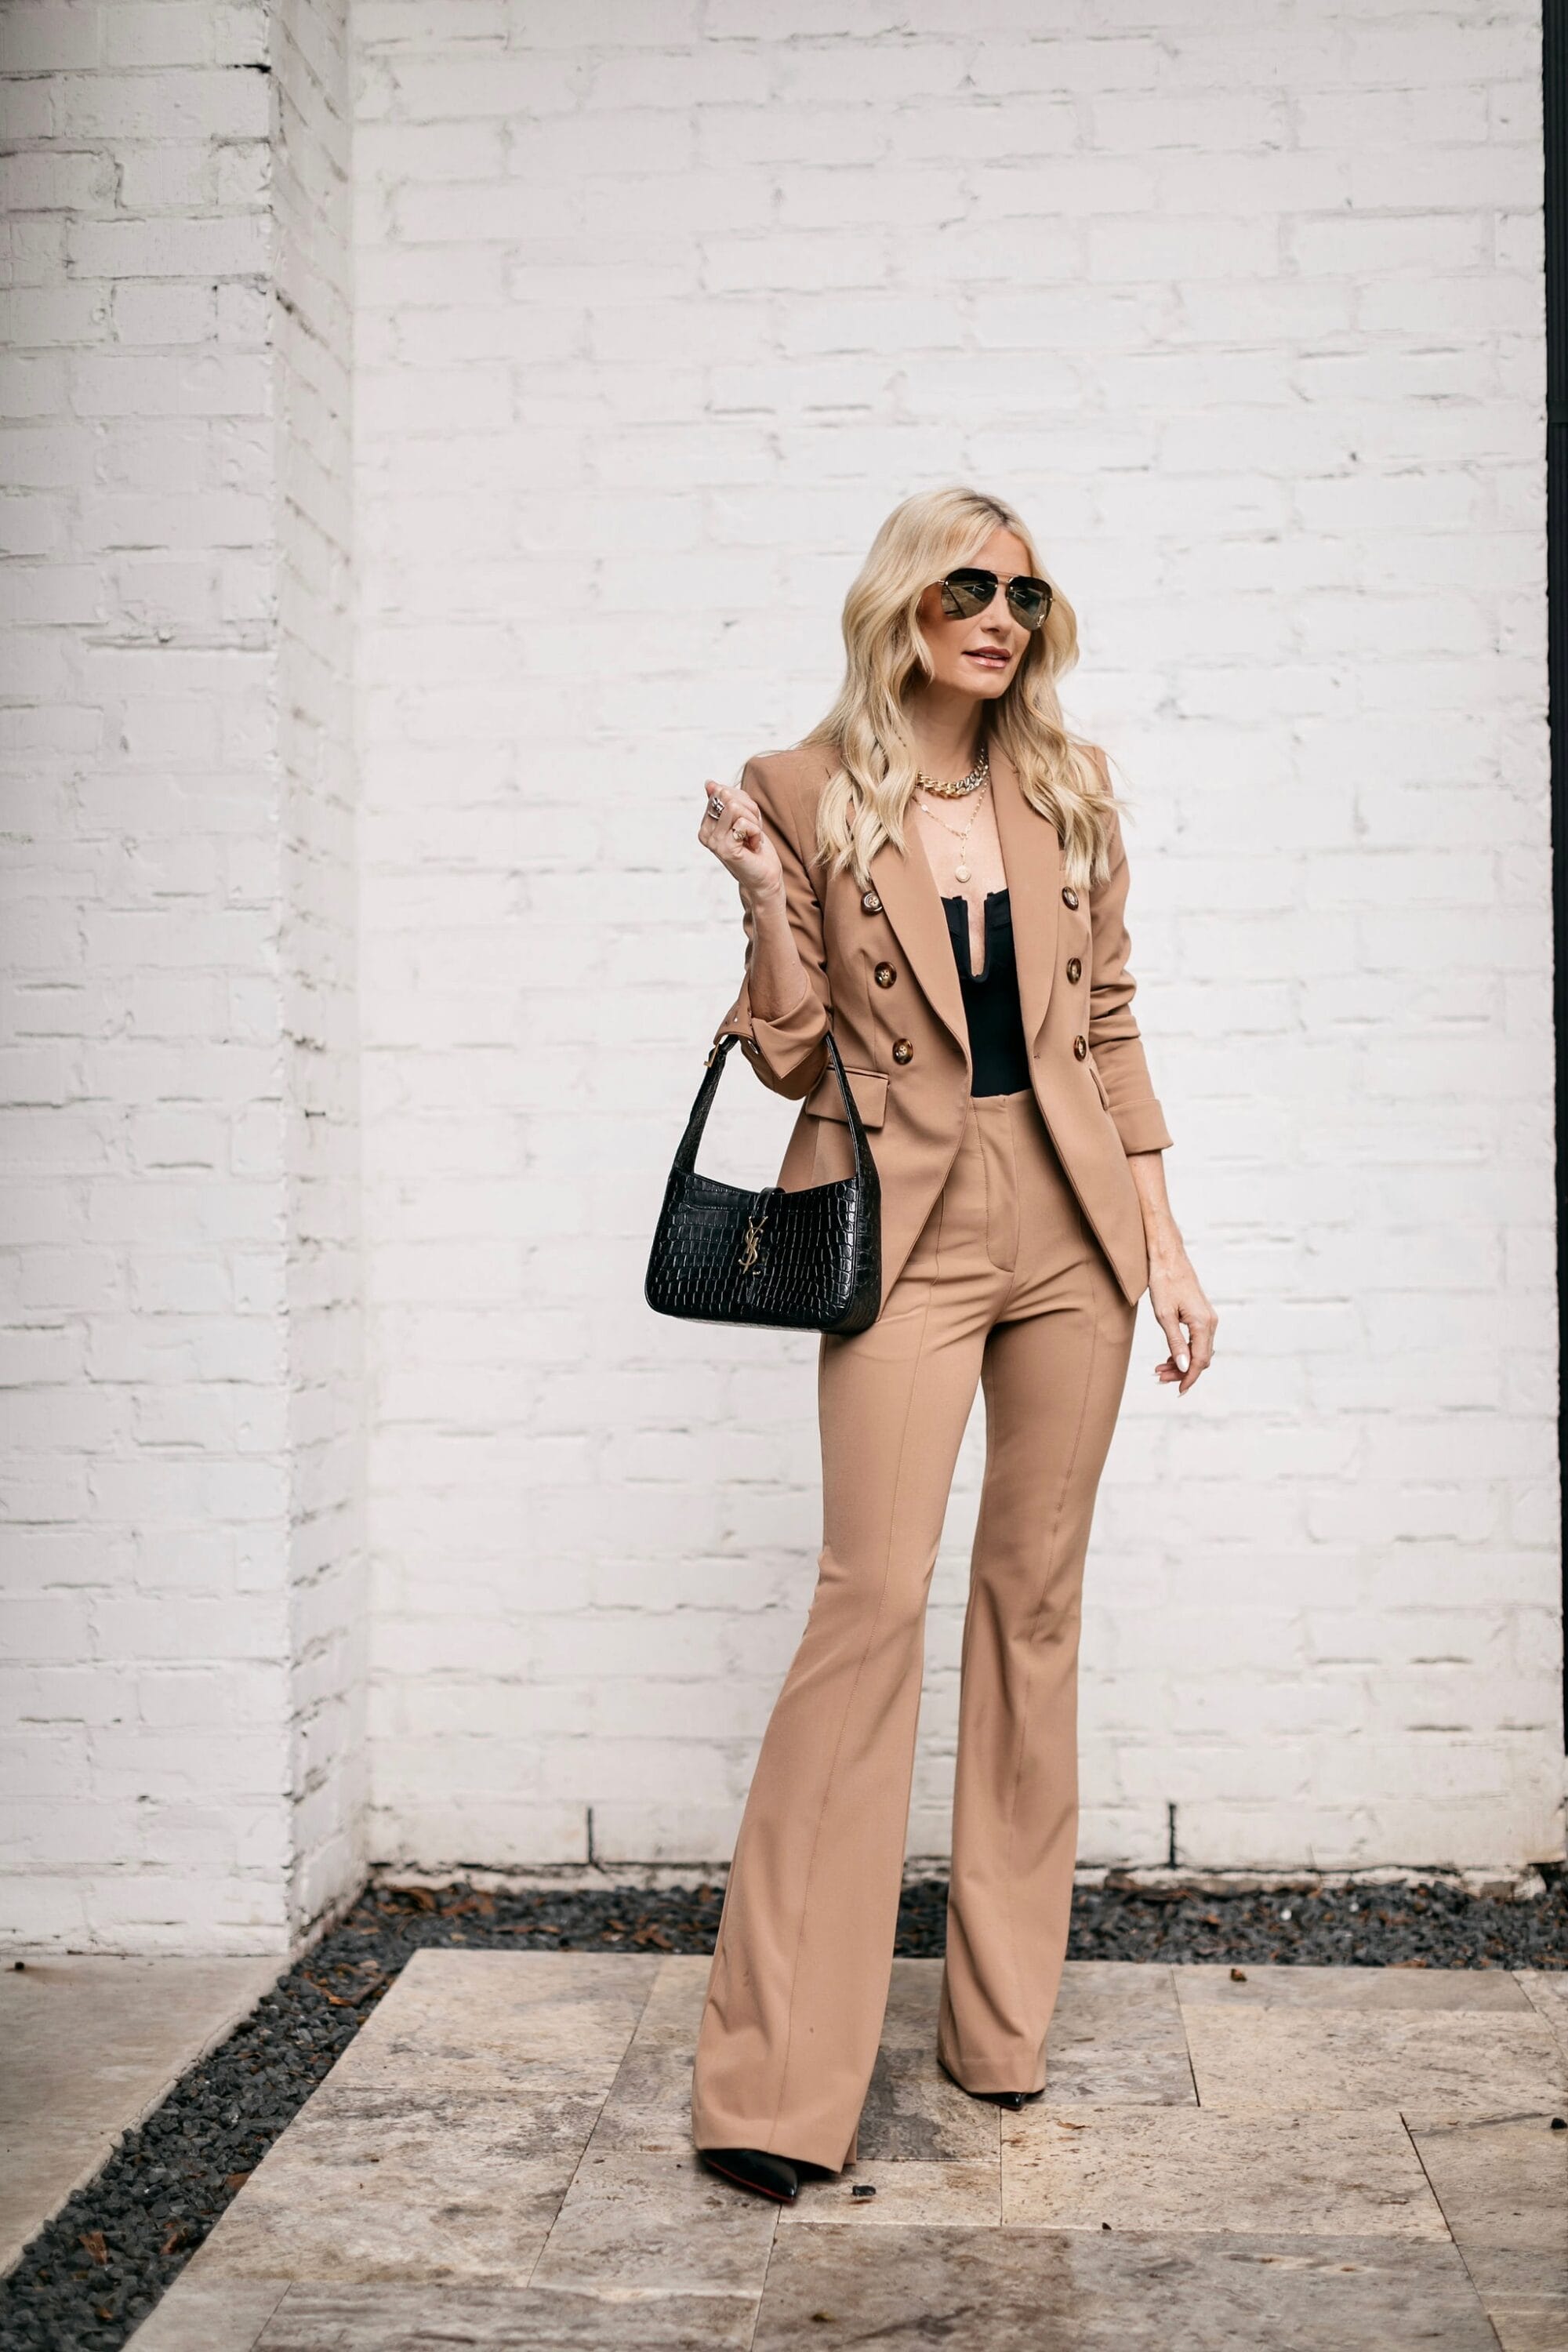 Dallas fashion blogger wearing examples of luxury pieces worth the investment.